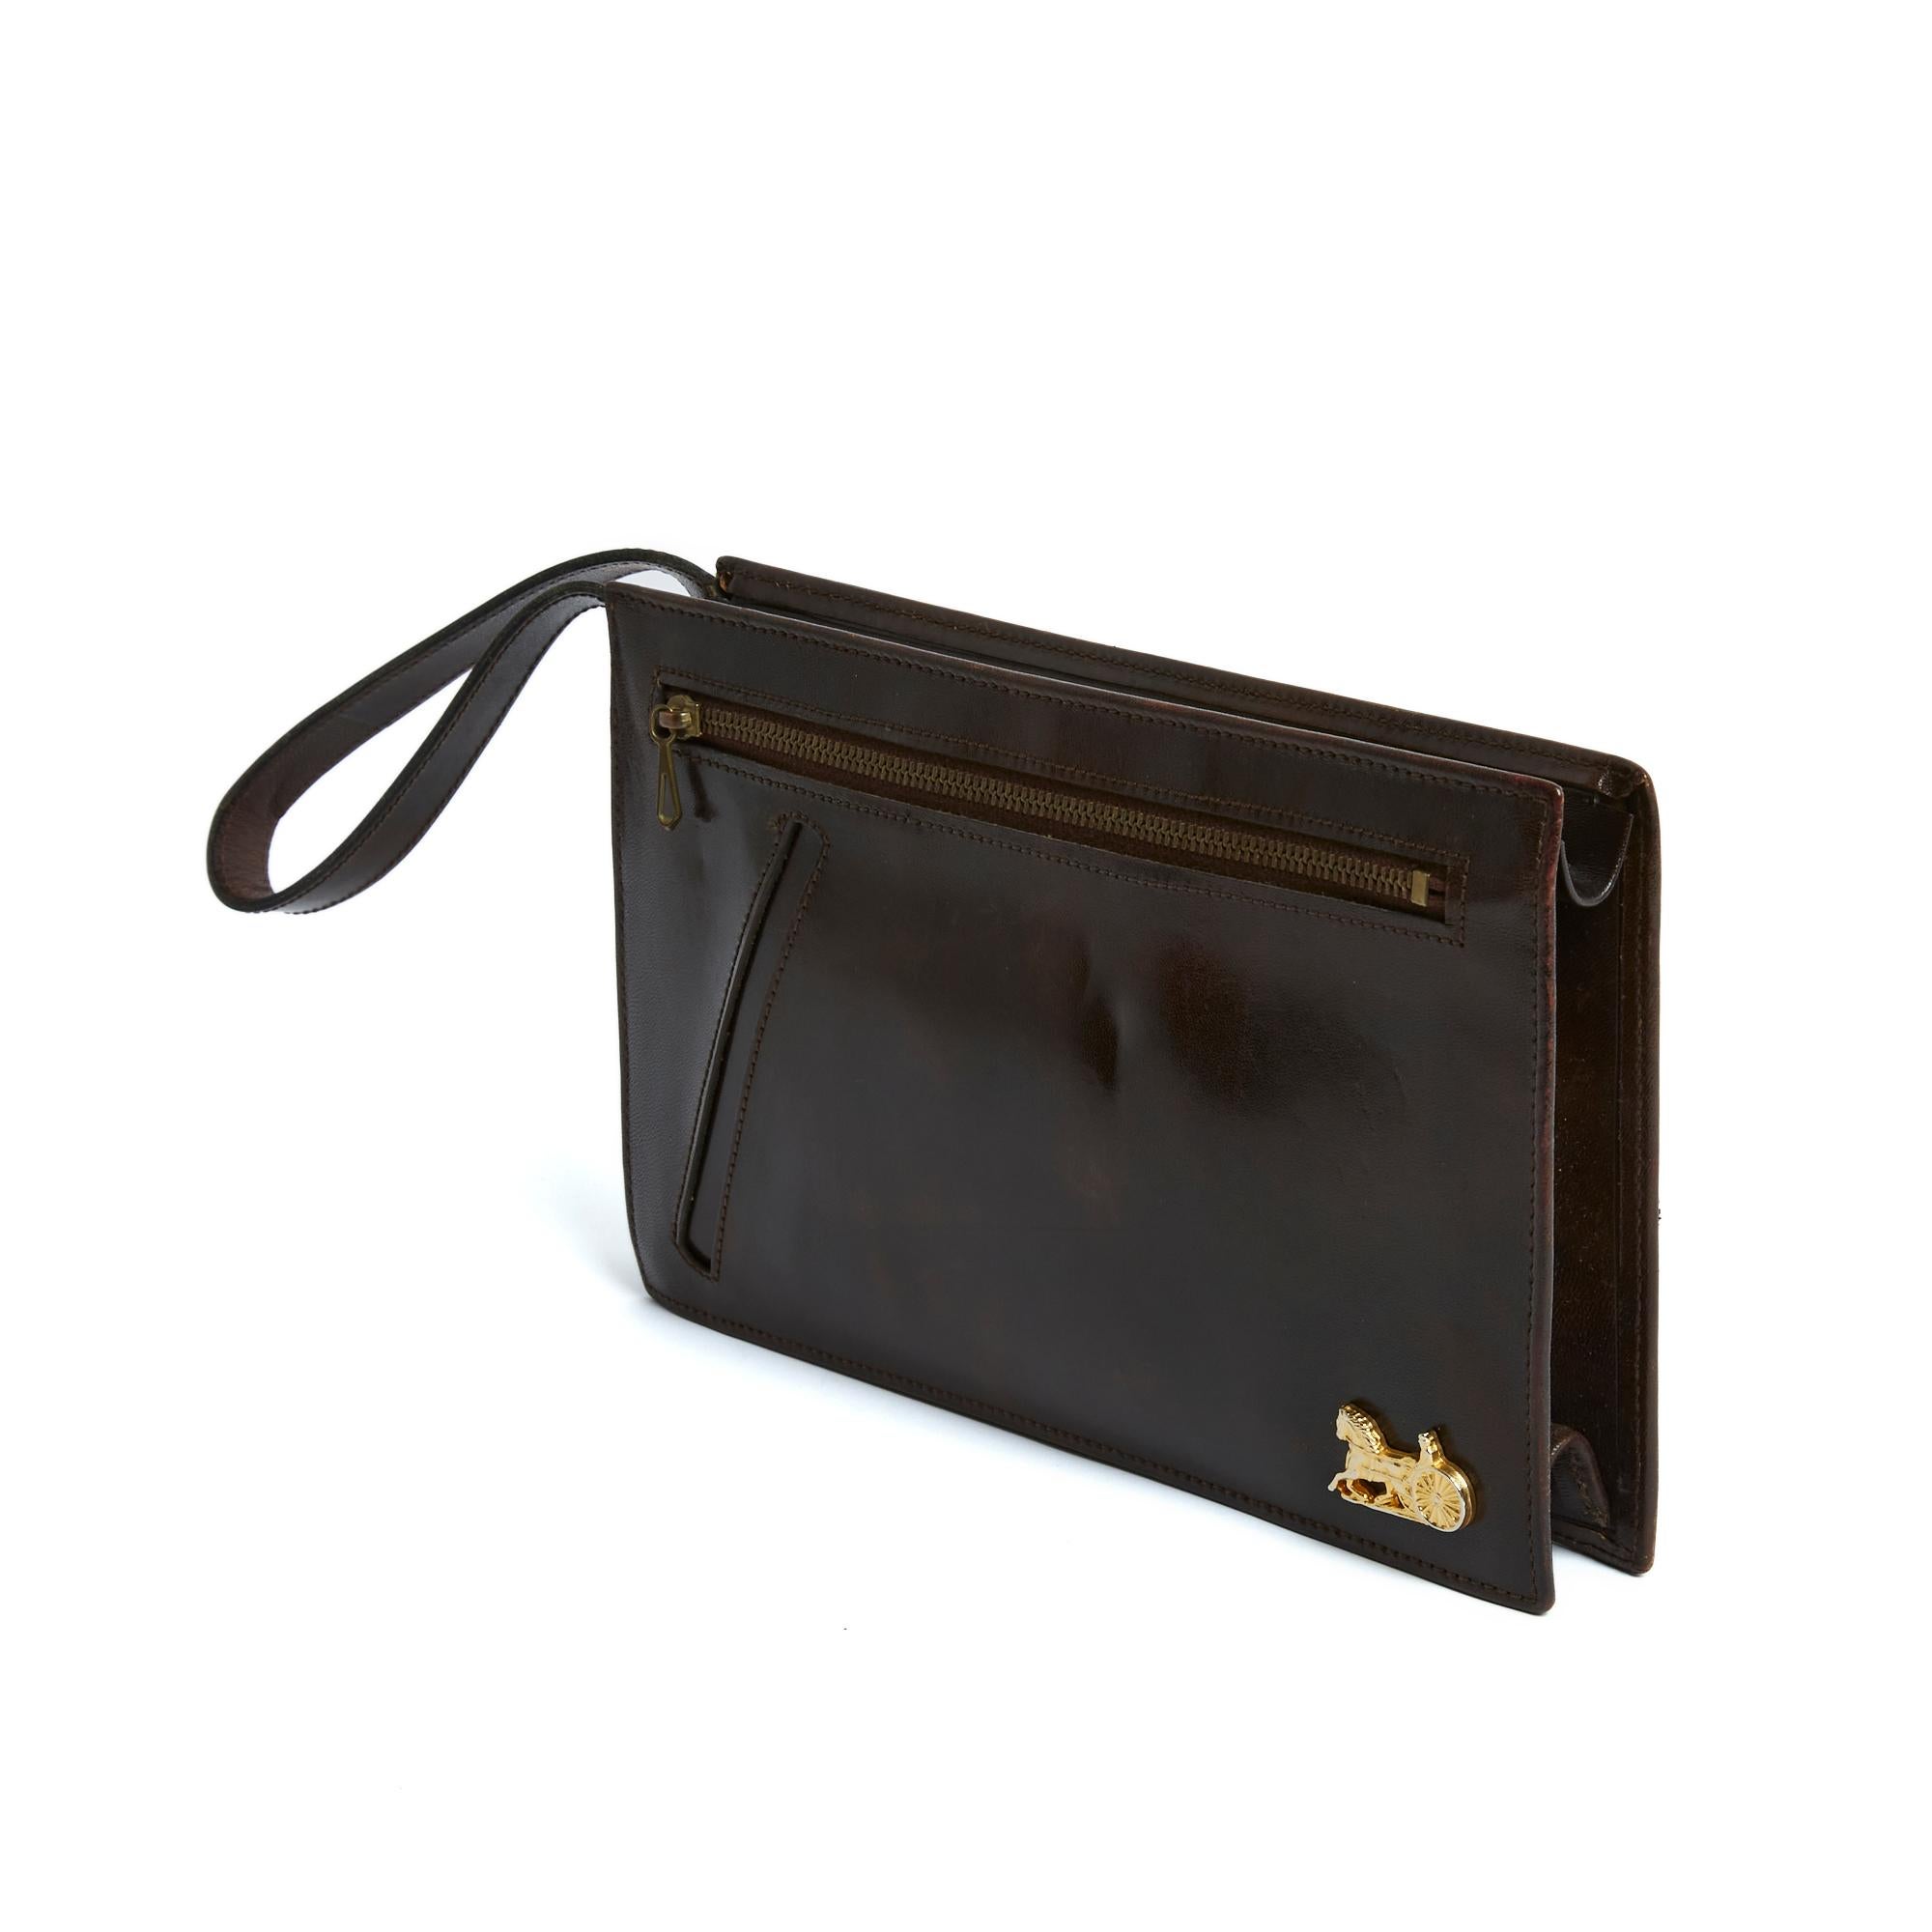 Céline vintage Calèche series clutch in dark brown smooth box leather, slit pocket and pocket closed with a zip on the 